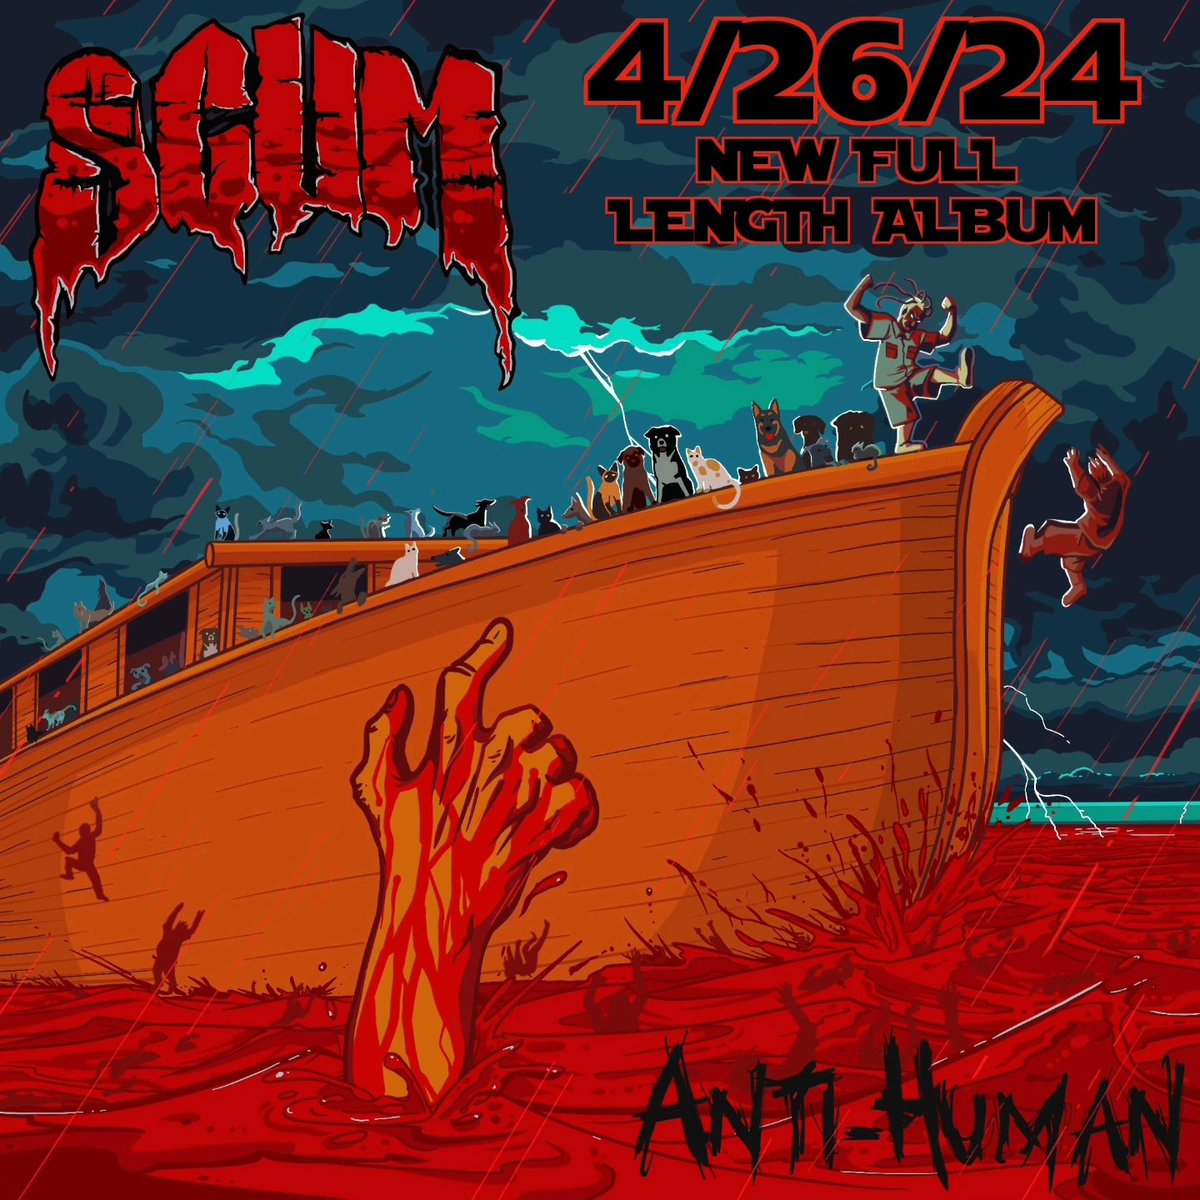 It's coming...can't wait to share this next installment in the gorehop saga with all of you! #LSP #Scum #Gorehop #Antihuman #Horrorcore #TeamSnuff #NewAlbum #NewMusicAlert